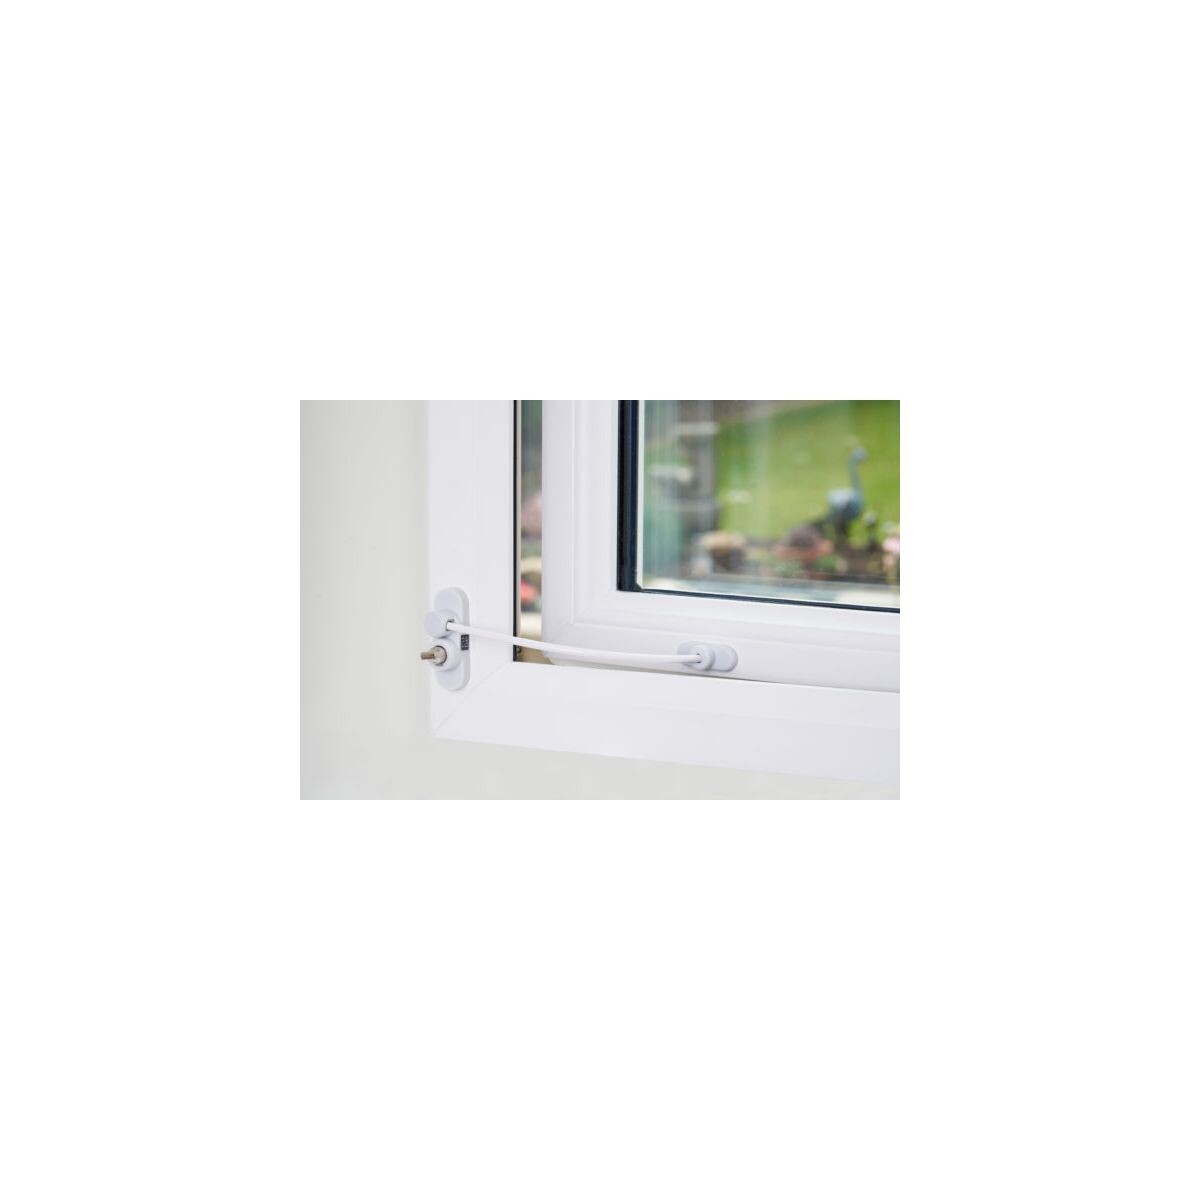 Cube Lock - Cable Window Restrictor for Irish Building Regulations